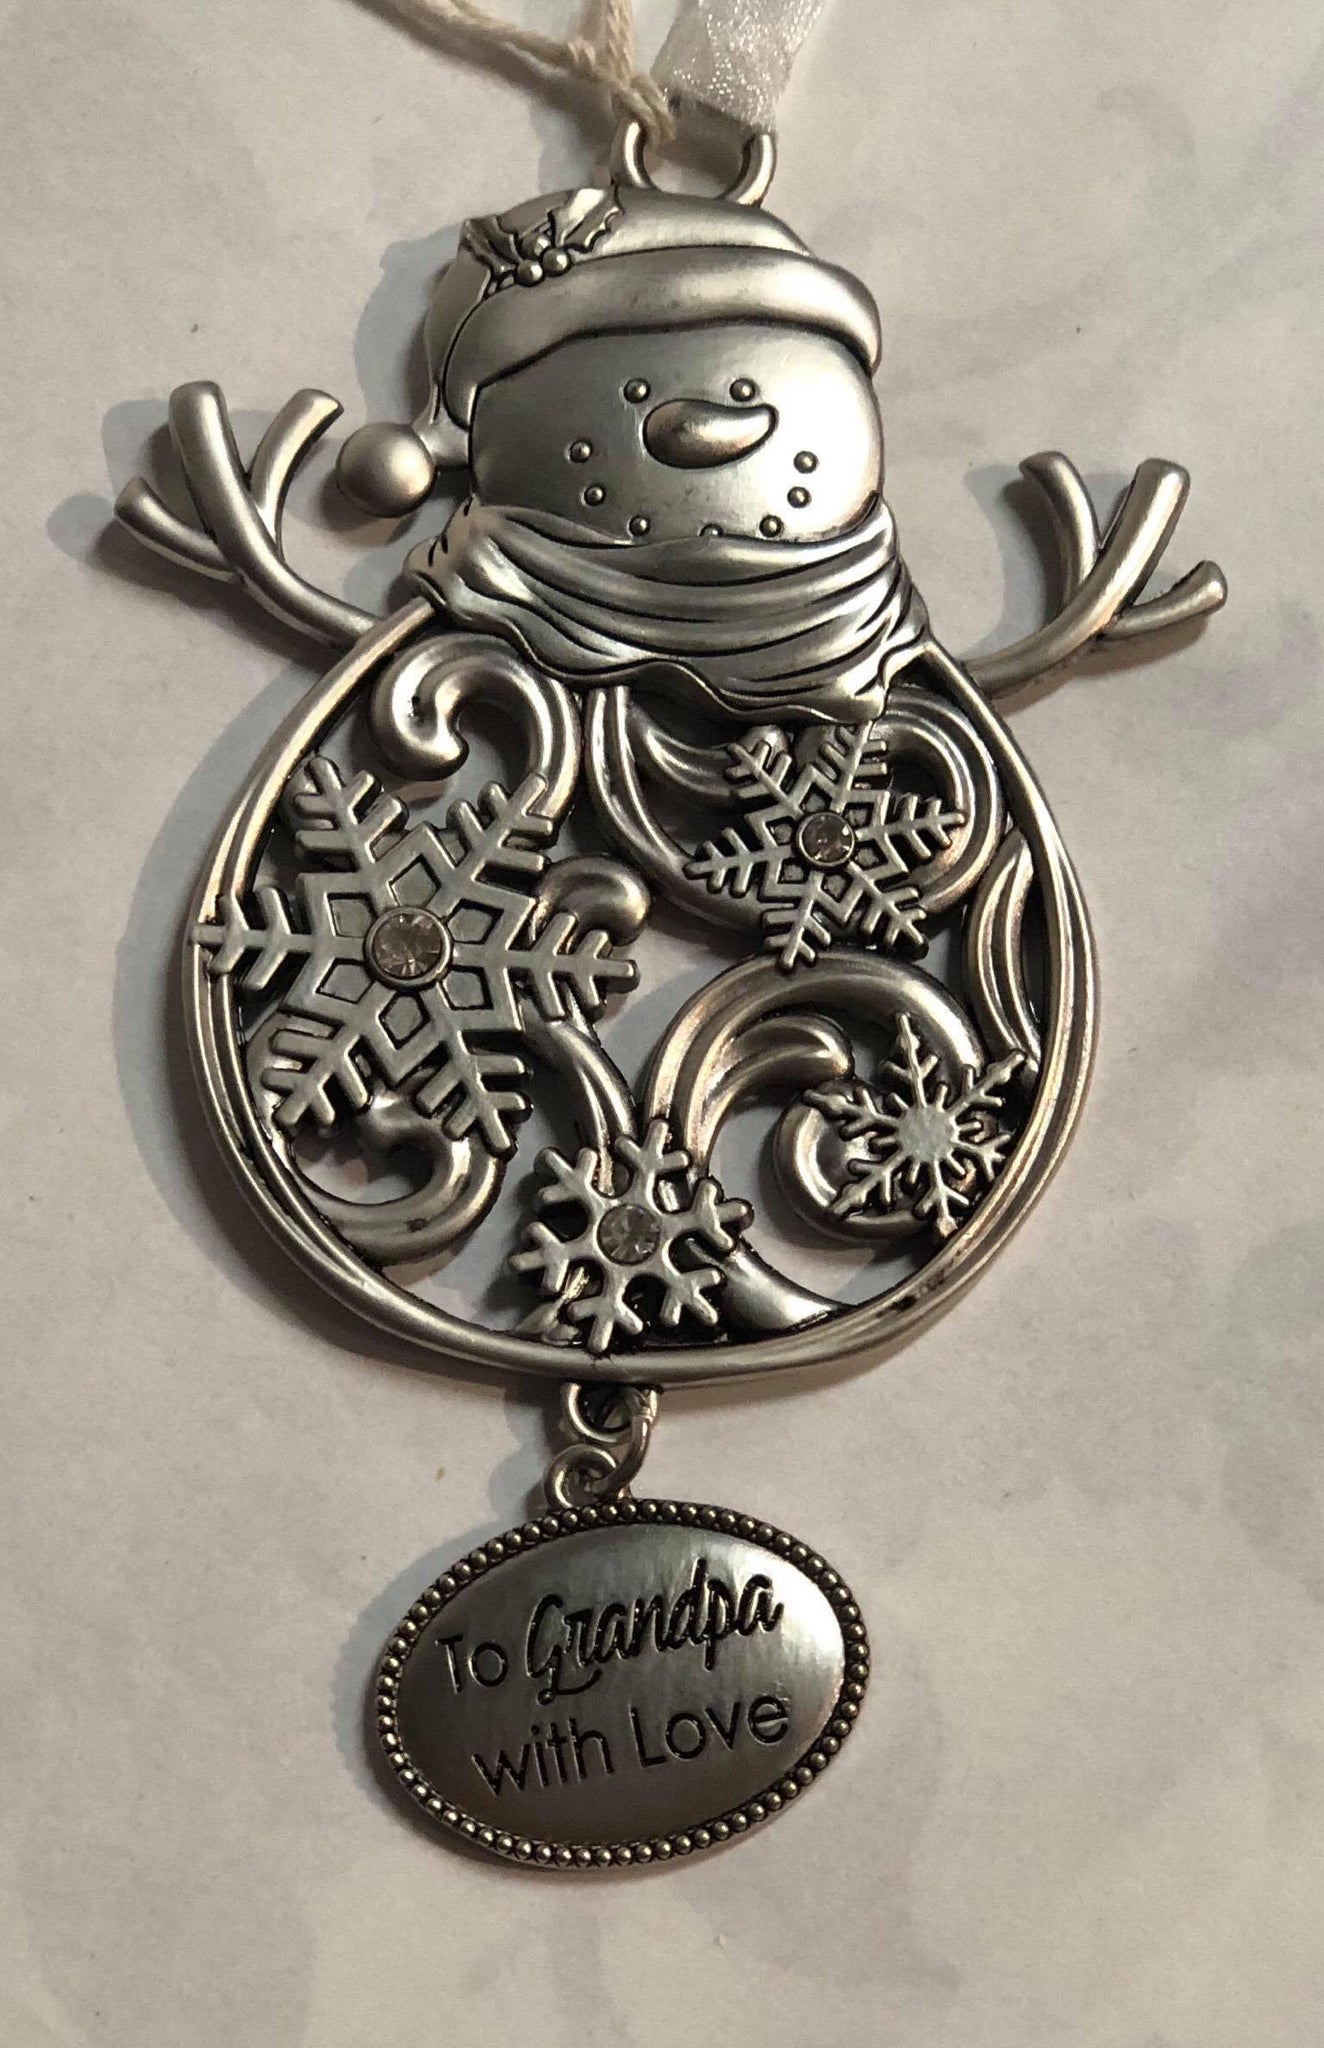 Snowman Tree Ornament with Hanging Charm "To Grandpa With Love"